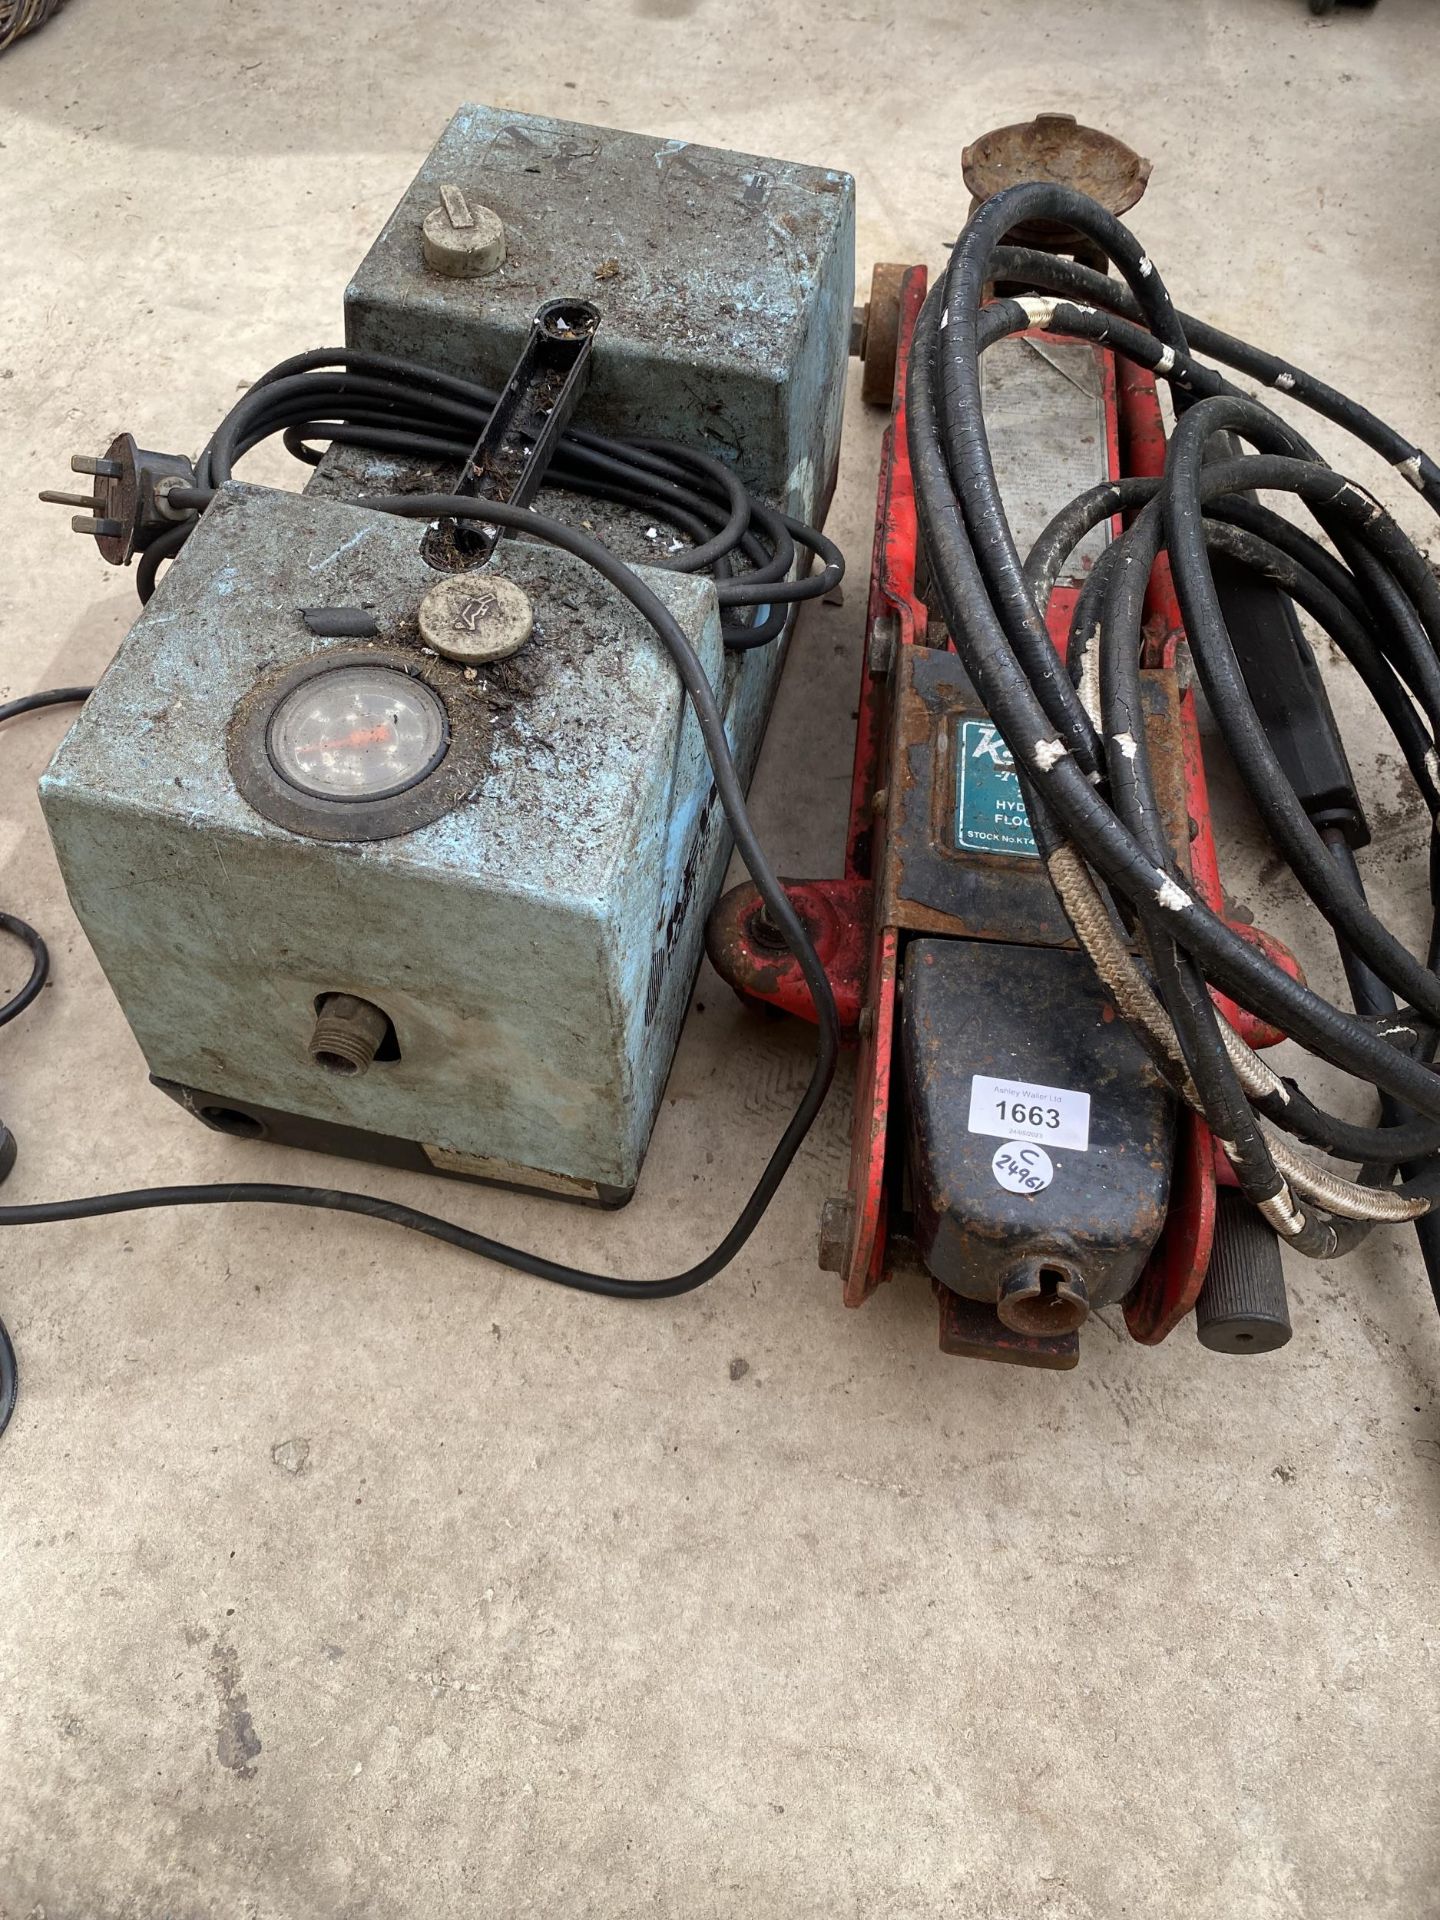 2 X ITEMS - A KEW HOBBY 88 PRESSURE WASHER AND HYDRAULIC FLOOR JACK - Image 2 of 4